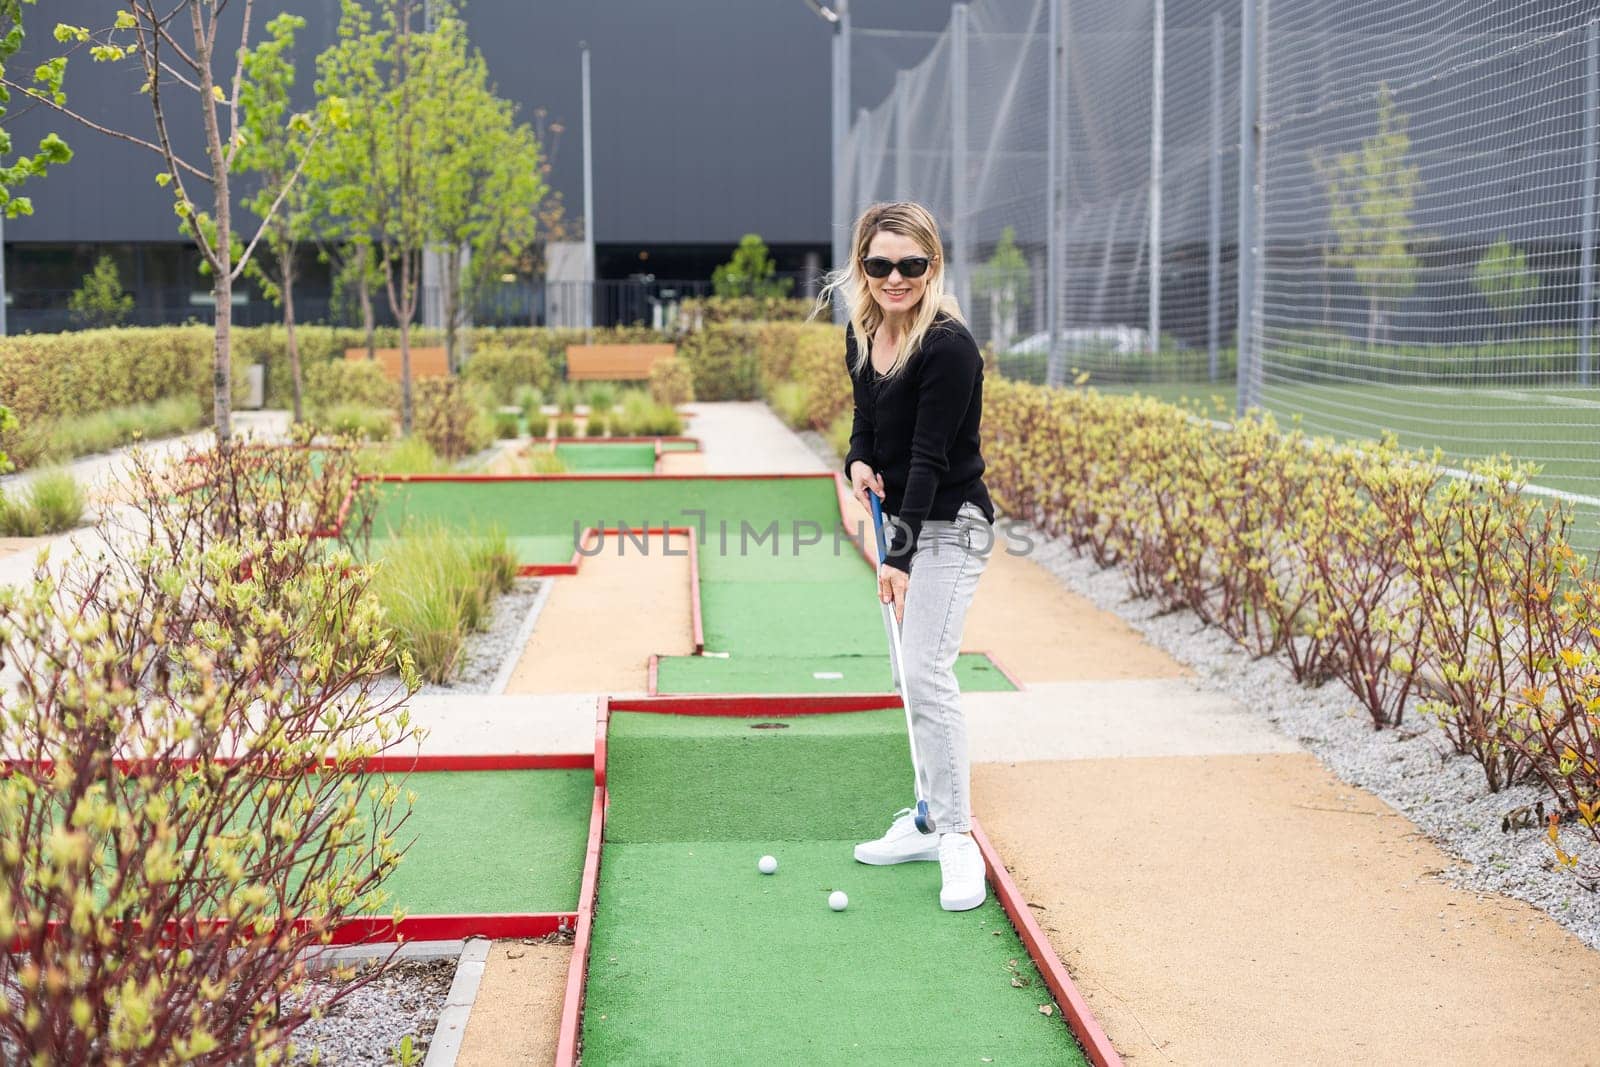 Woman playing mini golf at course. Summer sport and leisure activity by Andelov13